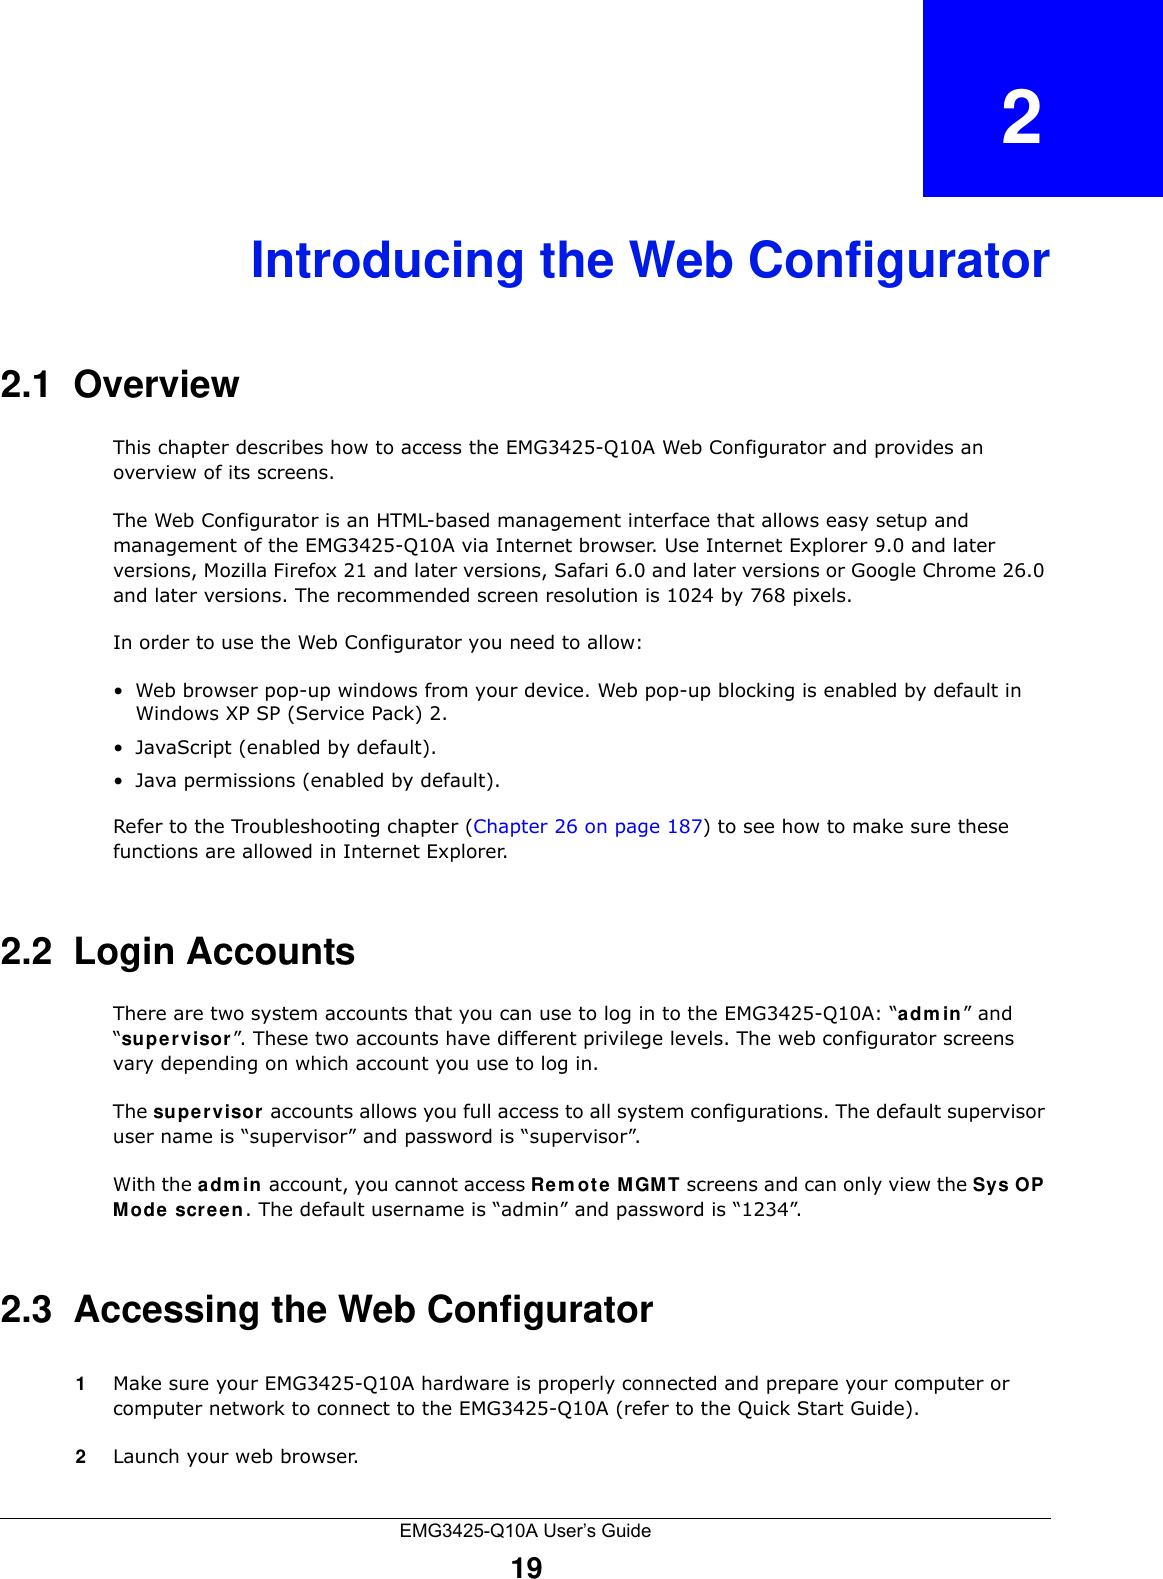 EMG3425-Q10A User’s Guide19CHAPTER   2Introducing the Web Configurator2.1  OverviewThis chapter describes how to access the EMG3425-Q10A Web Configurator and provides an overview of its screens.The Web Configurator is an HTML-based management interface that allows easy setup and management of the EMG3425-Q10A via Internet browser. Use Internet Explorer 9.0 and later versions, Mozilla Firefox 21 and later versions, Safari 6.0 and later versions or Google Chrome 26.0 and later versions. The recommended screen resolution is 1024 by 768 pixels.In order to use the Web Configurator you need to allow:• Web browser pop-up windows from your device. Web pop-up blocking is enabled by default in Windows XP SP (Service Pack) 2.• JavaScript (enabled by default).• Java permissions (enabled by default).Refer to the Troubleshooting chapter (Chapter 26 on page 187) to see how to make sure these functions are allowed in Internet Explorer.2.2  Login AccountsThere are two system accounts that you can use to log in to the EMG3425-Q10A: “adm in” and “supe r visor ”. These two accounts have different privilege levels. The web configurator screens vary depending on which account you use to log in.The supe r visor  accounts allows you full access to all system configurations. The default supervisor user name is “supervisor” and password is “supervisor”.With the adm in  account, you cannot access Re m ot e  MGM T screens and can only view the Sys OP Mode  screen. The default username is “admin” and password is “1234”.2.3  Accessing the Web Configurator1Make sure your EMG3425-Q10A hardware is properly connected and prepare your computer or computer network to connect to the EMG3425-Q10A (refer to the Quick Start Guide).2Launch your web browser.